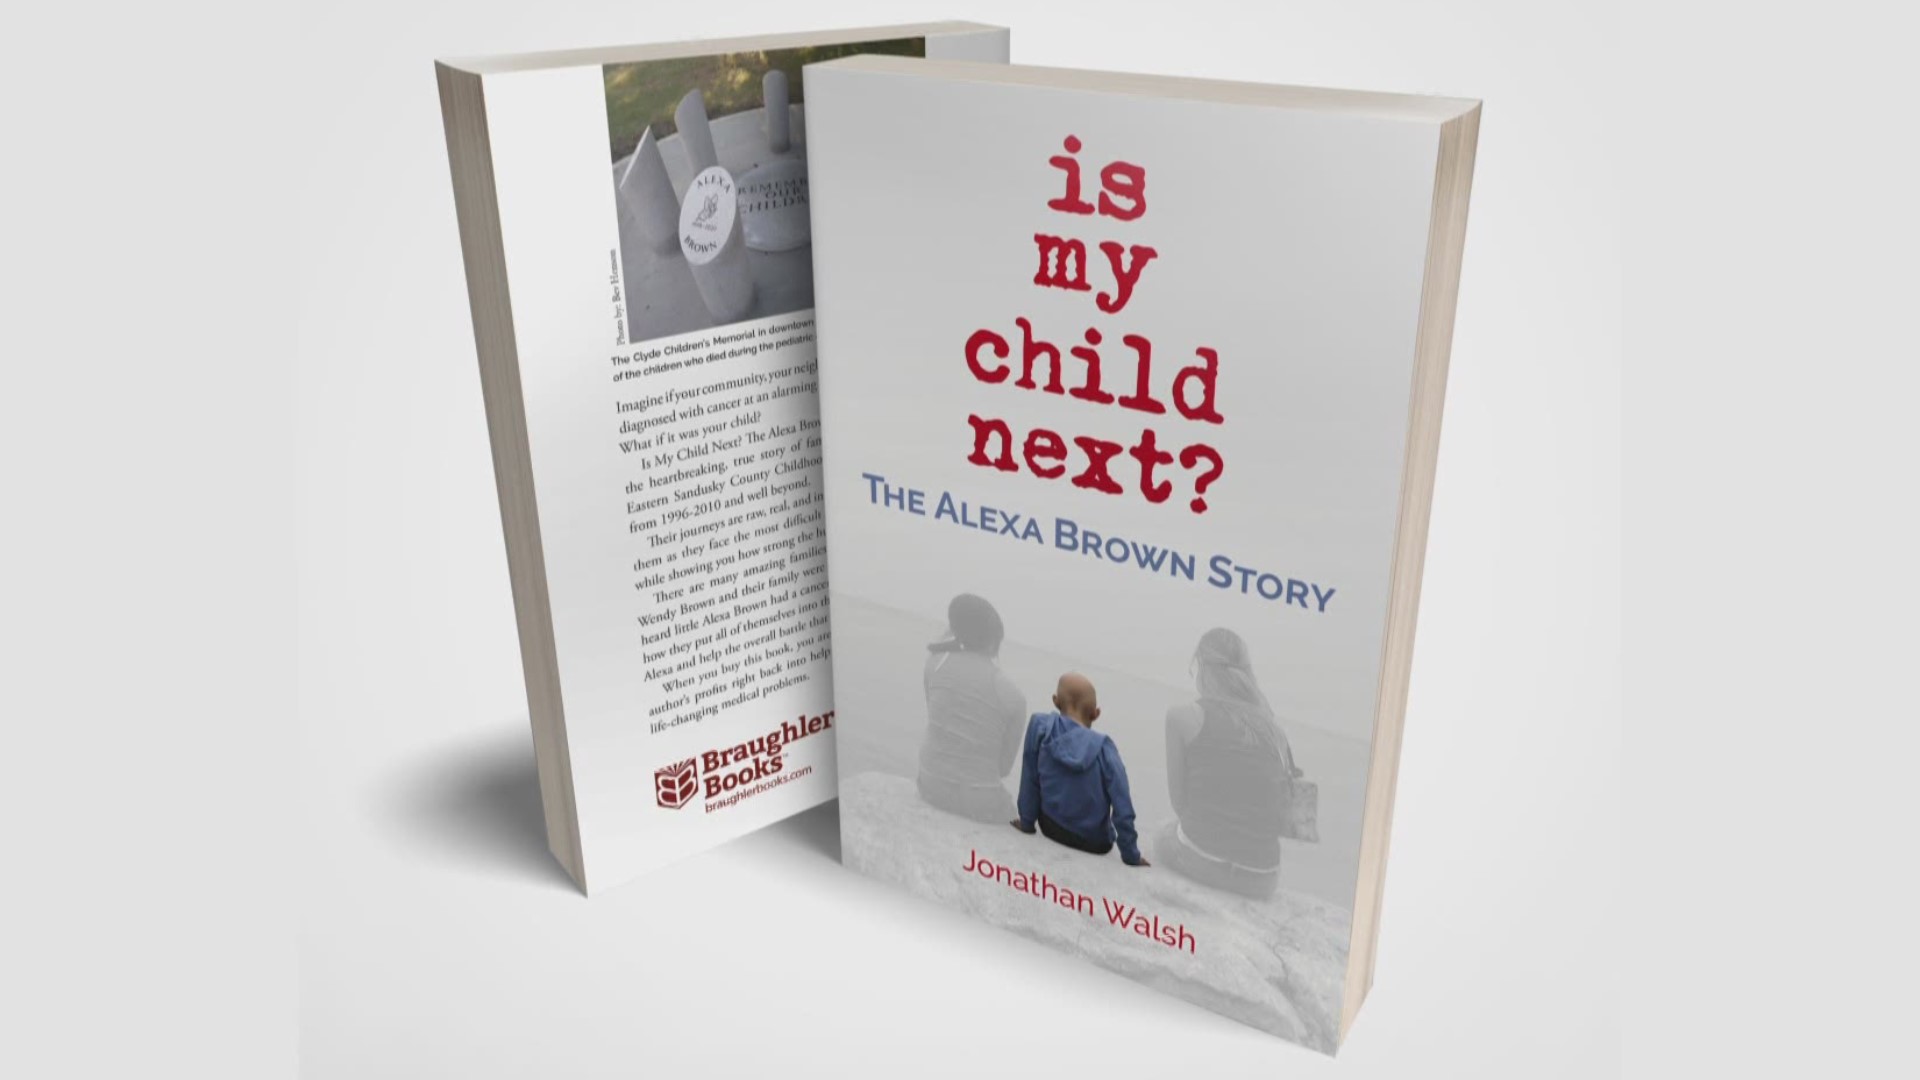 It was a tragedy that captured the attention of northwest Ohio, and now it's the subject of a new book to raise awareness of childhood cancer.